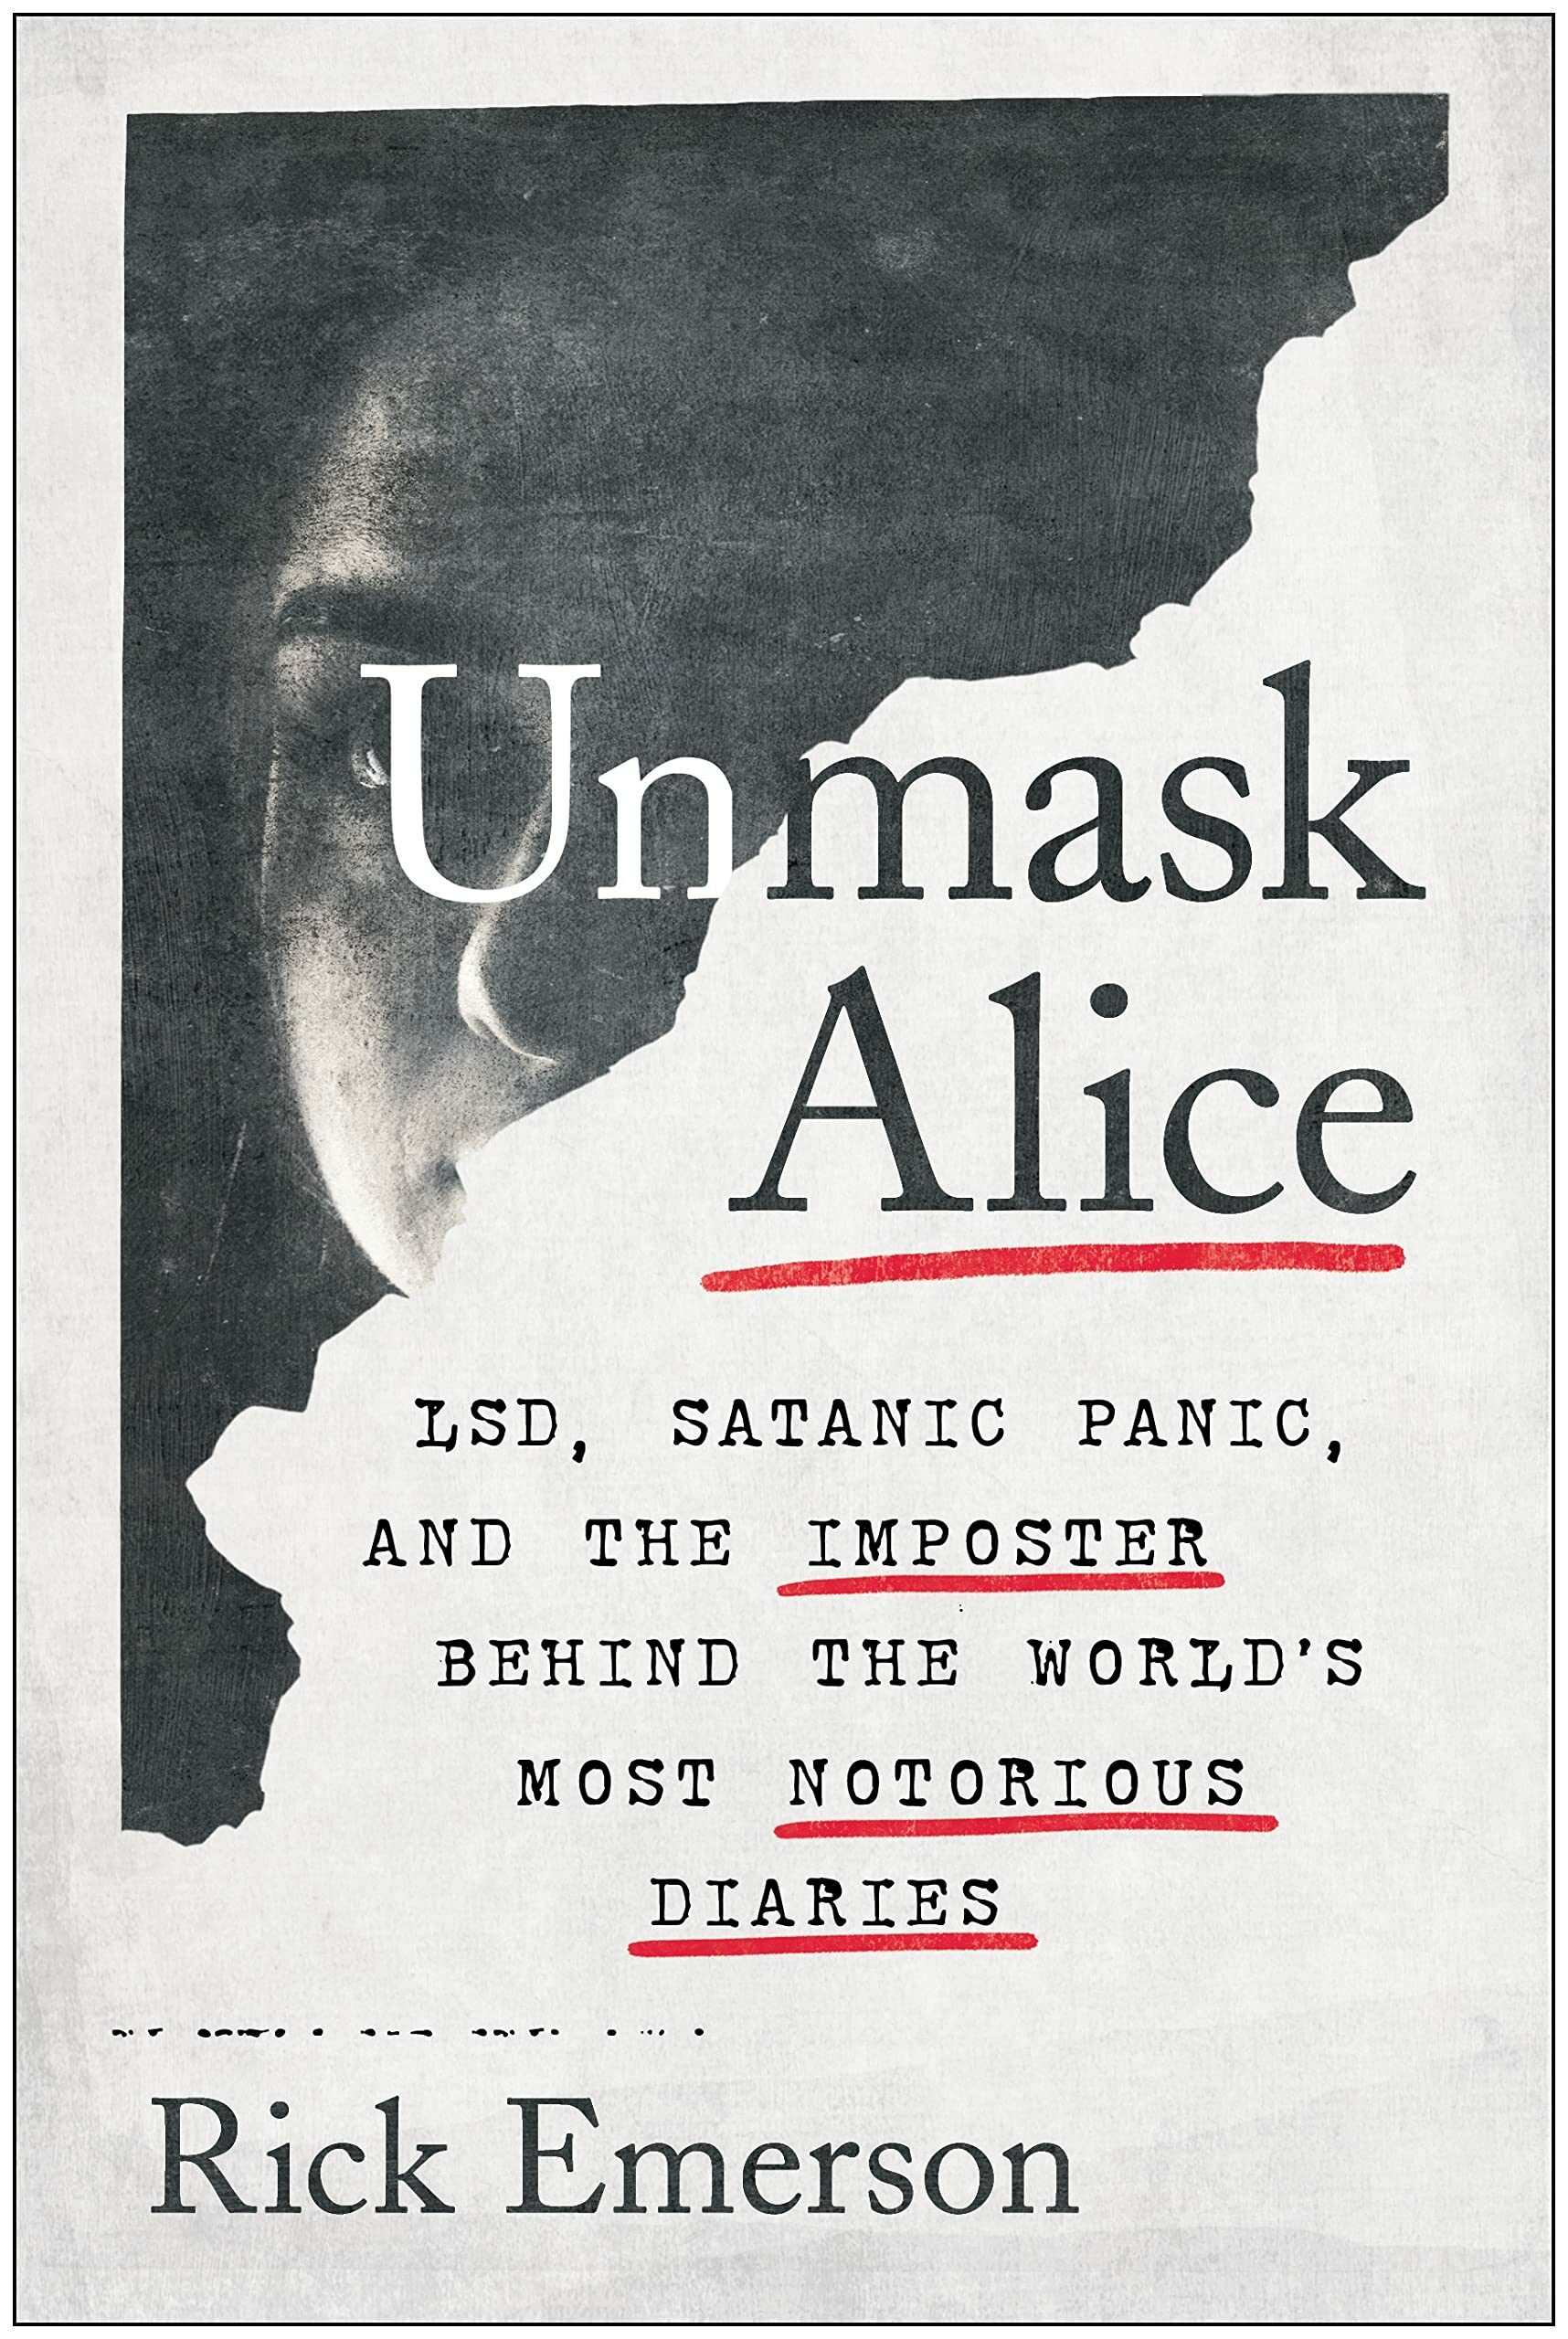 Unmask Alice: LSD, Satanic Panic, and the Imposter Behind the Worlds Most Notorious Diaries